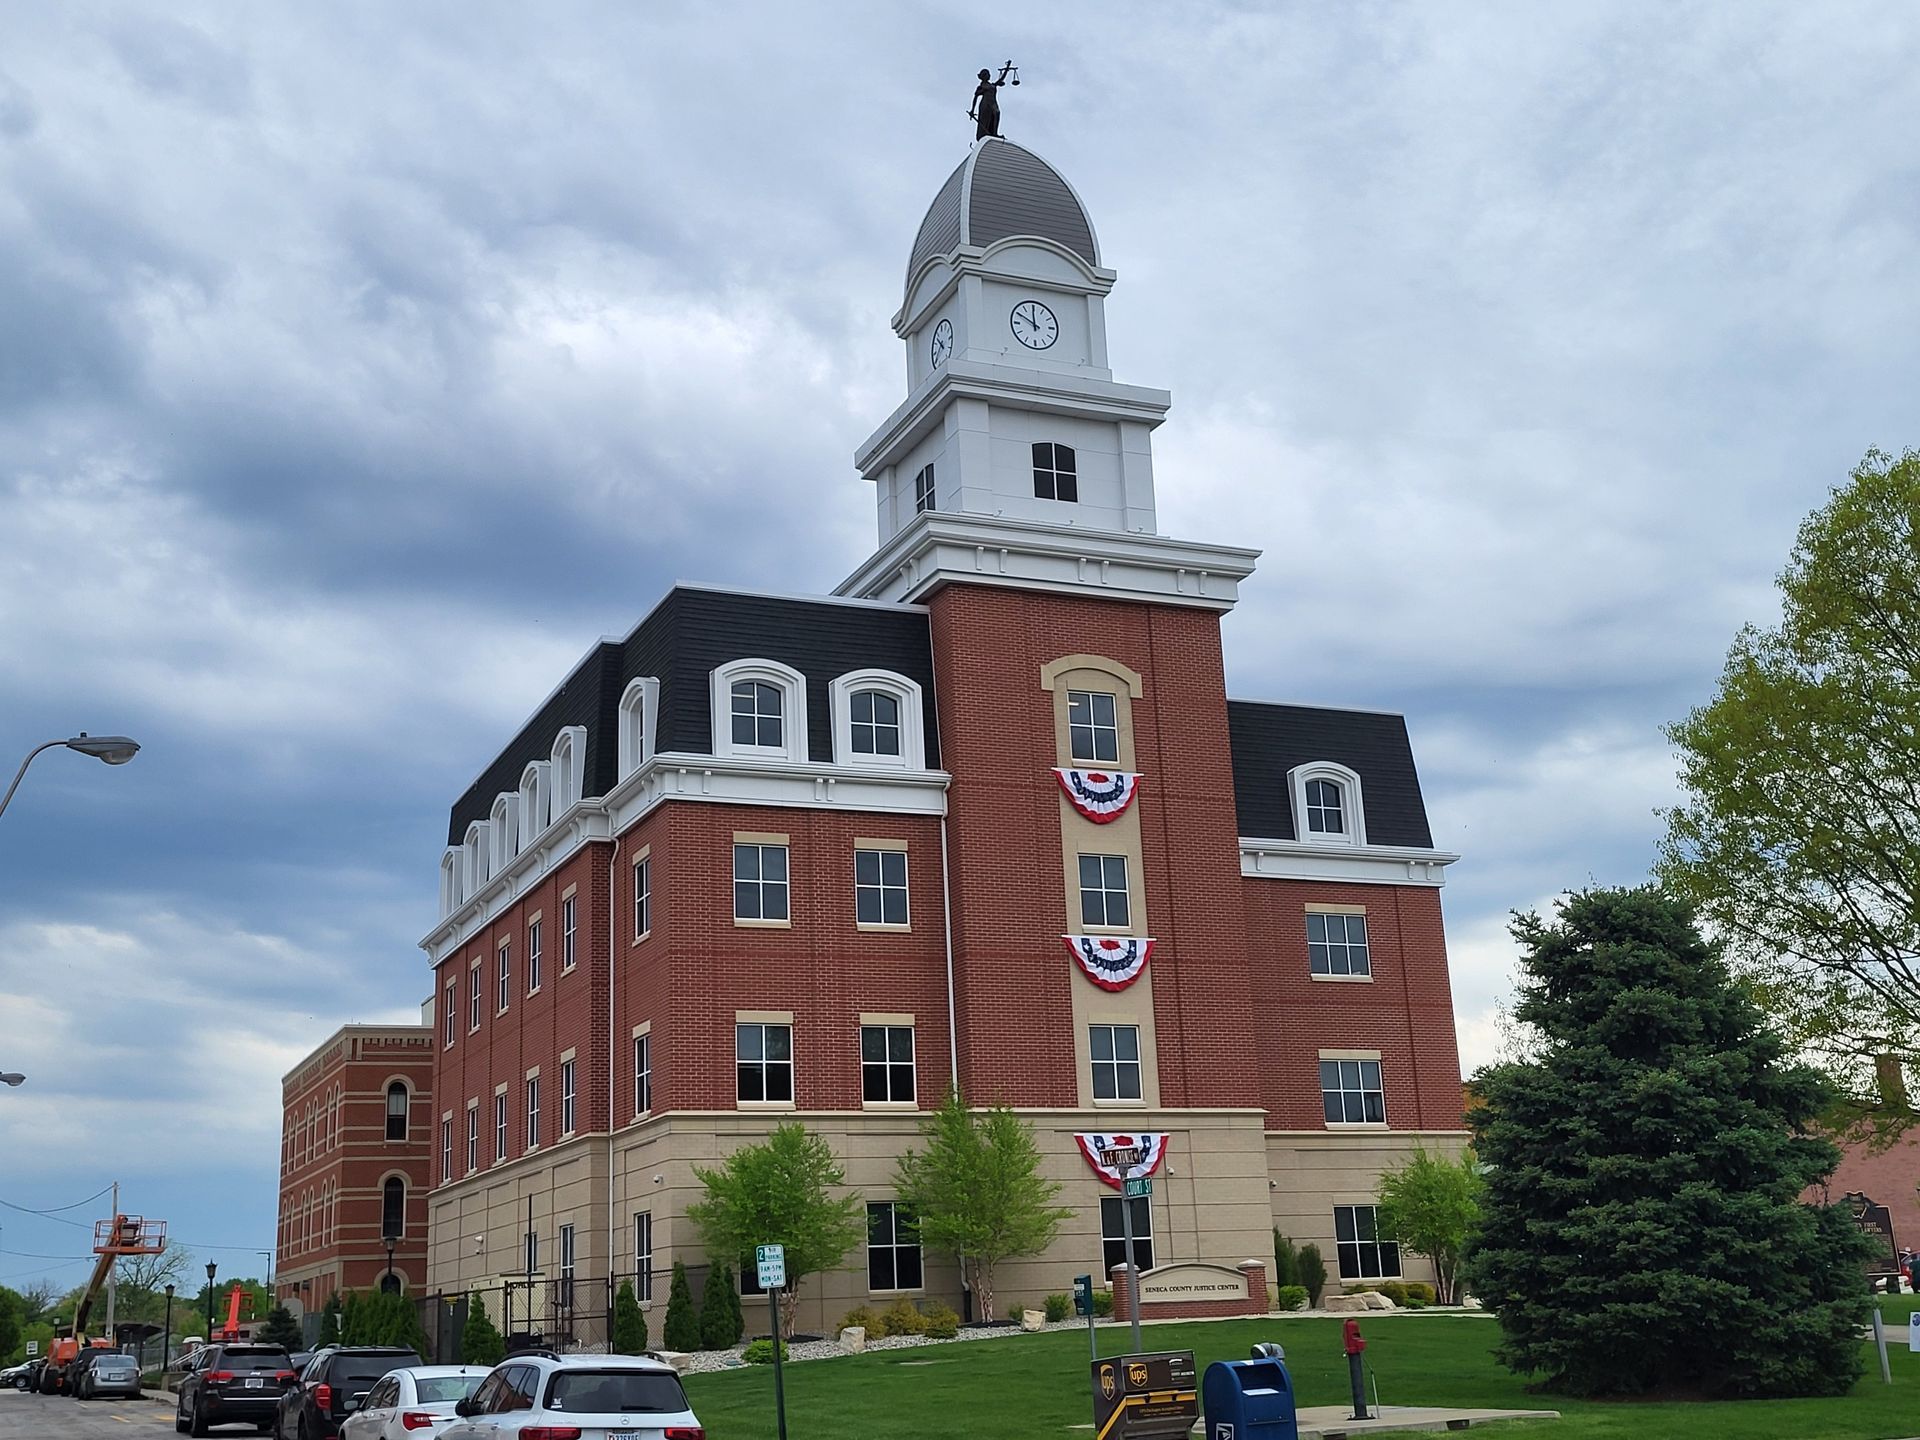 A large brick building with a clock tower on top of it